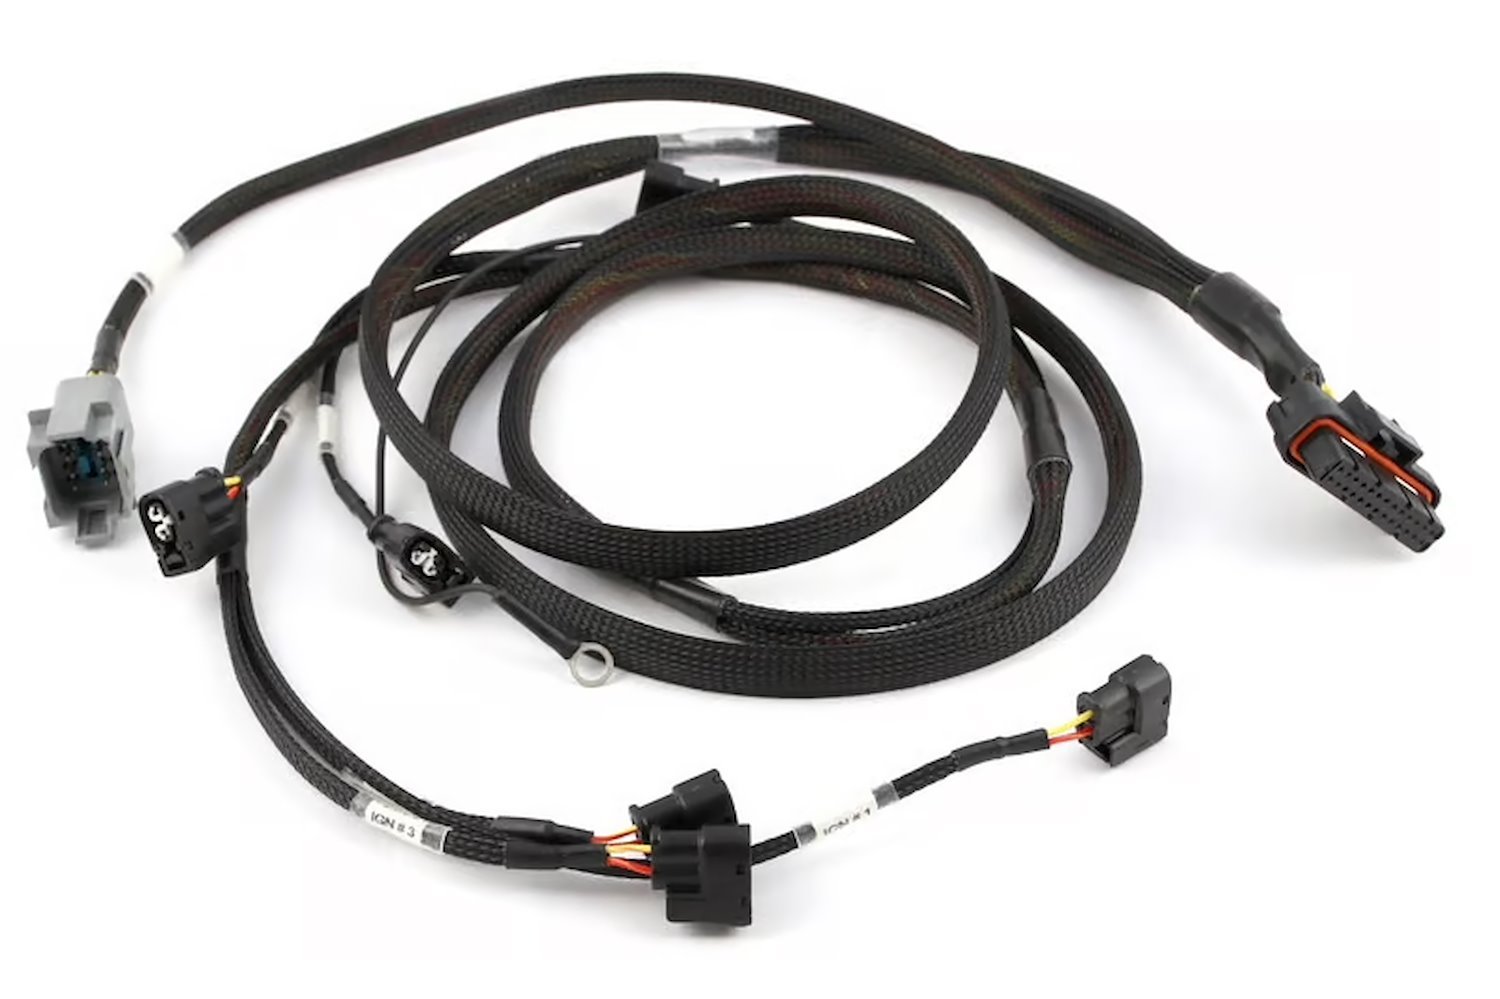 HT-130319 Elite 2000/2500 Terminated HPI6 Ignition Harness Only, Toyota 2JZ